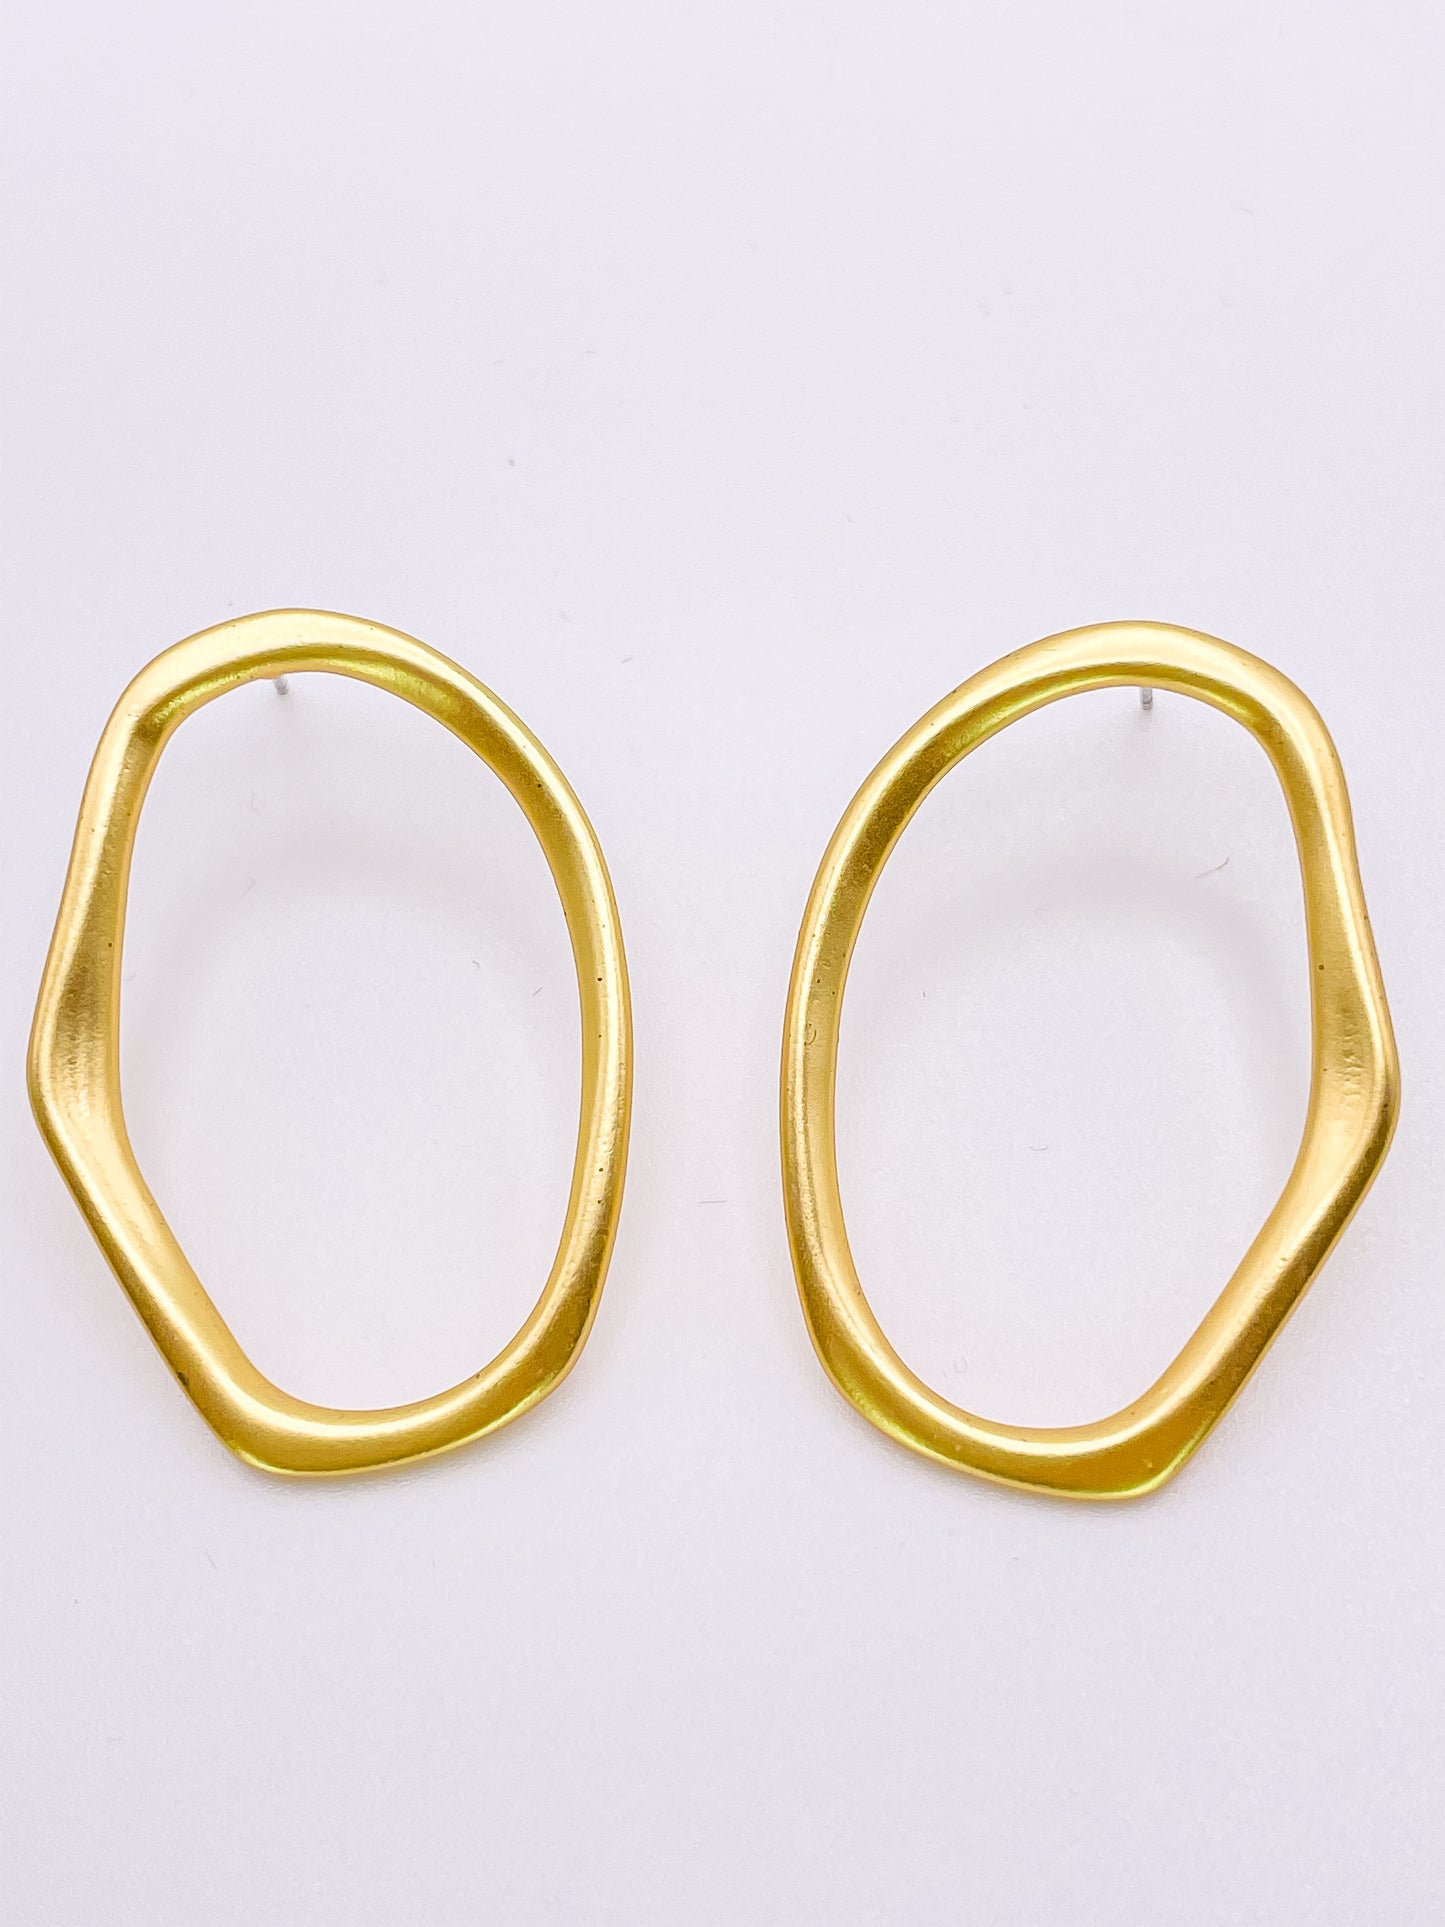 Gold imperfect oval hoops